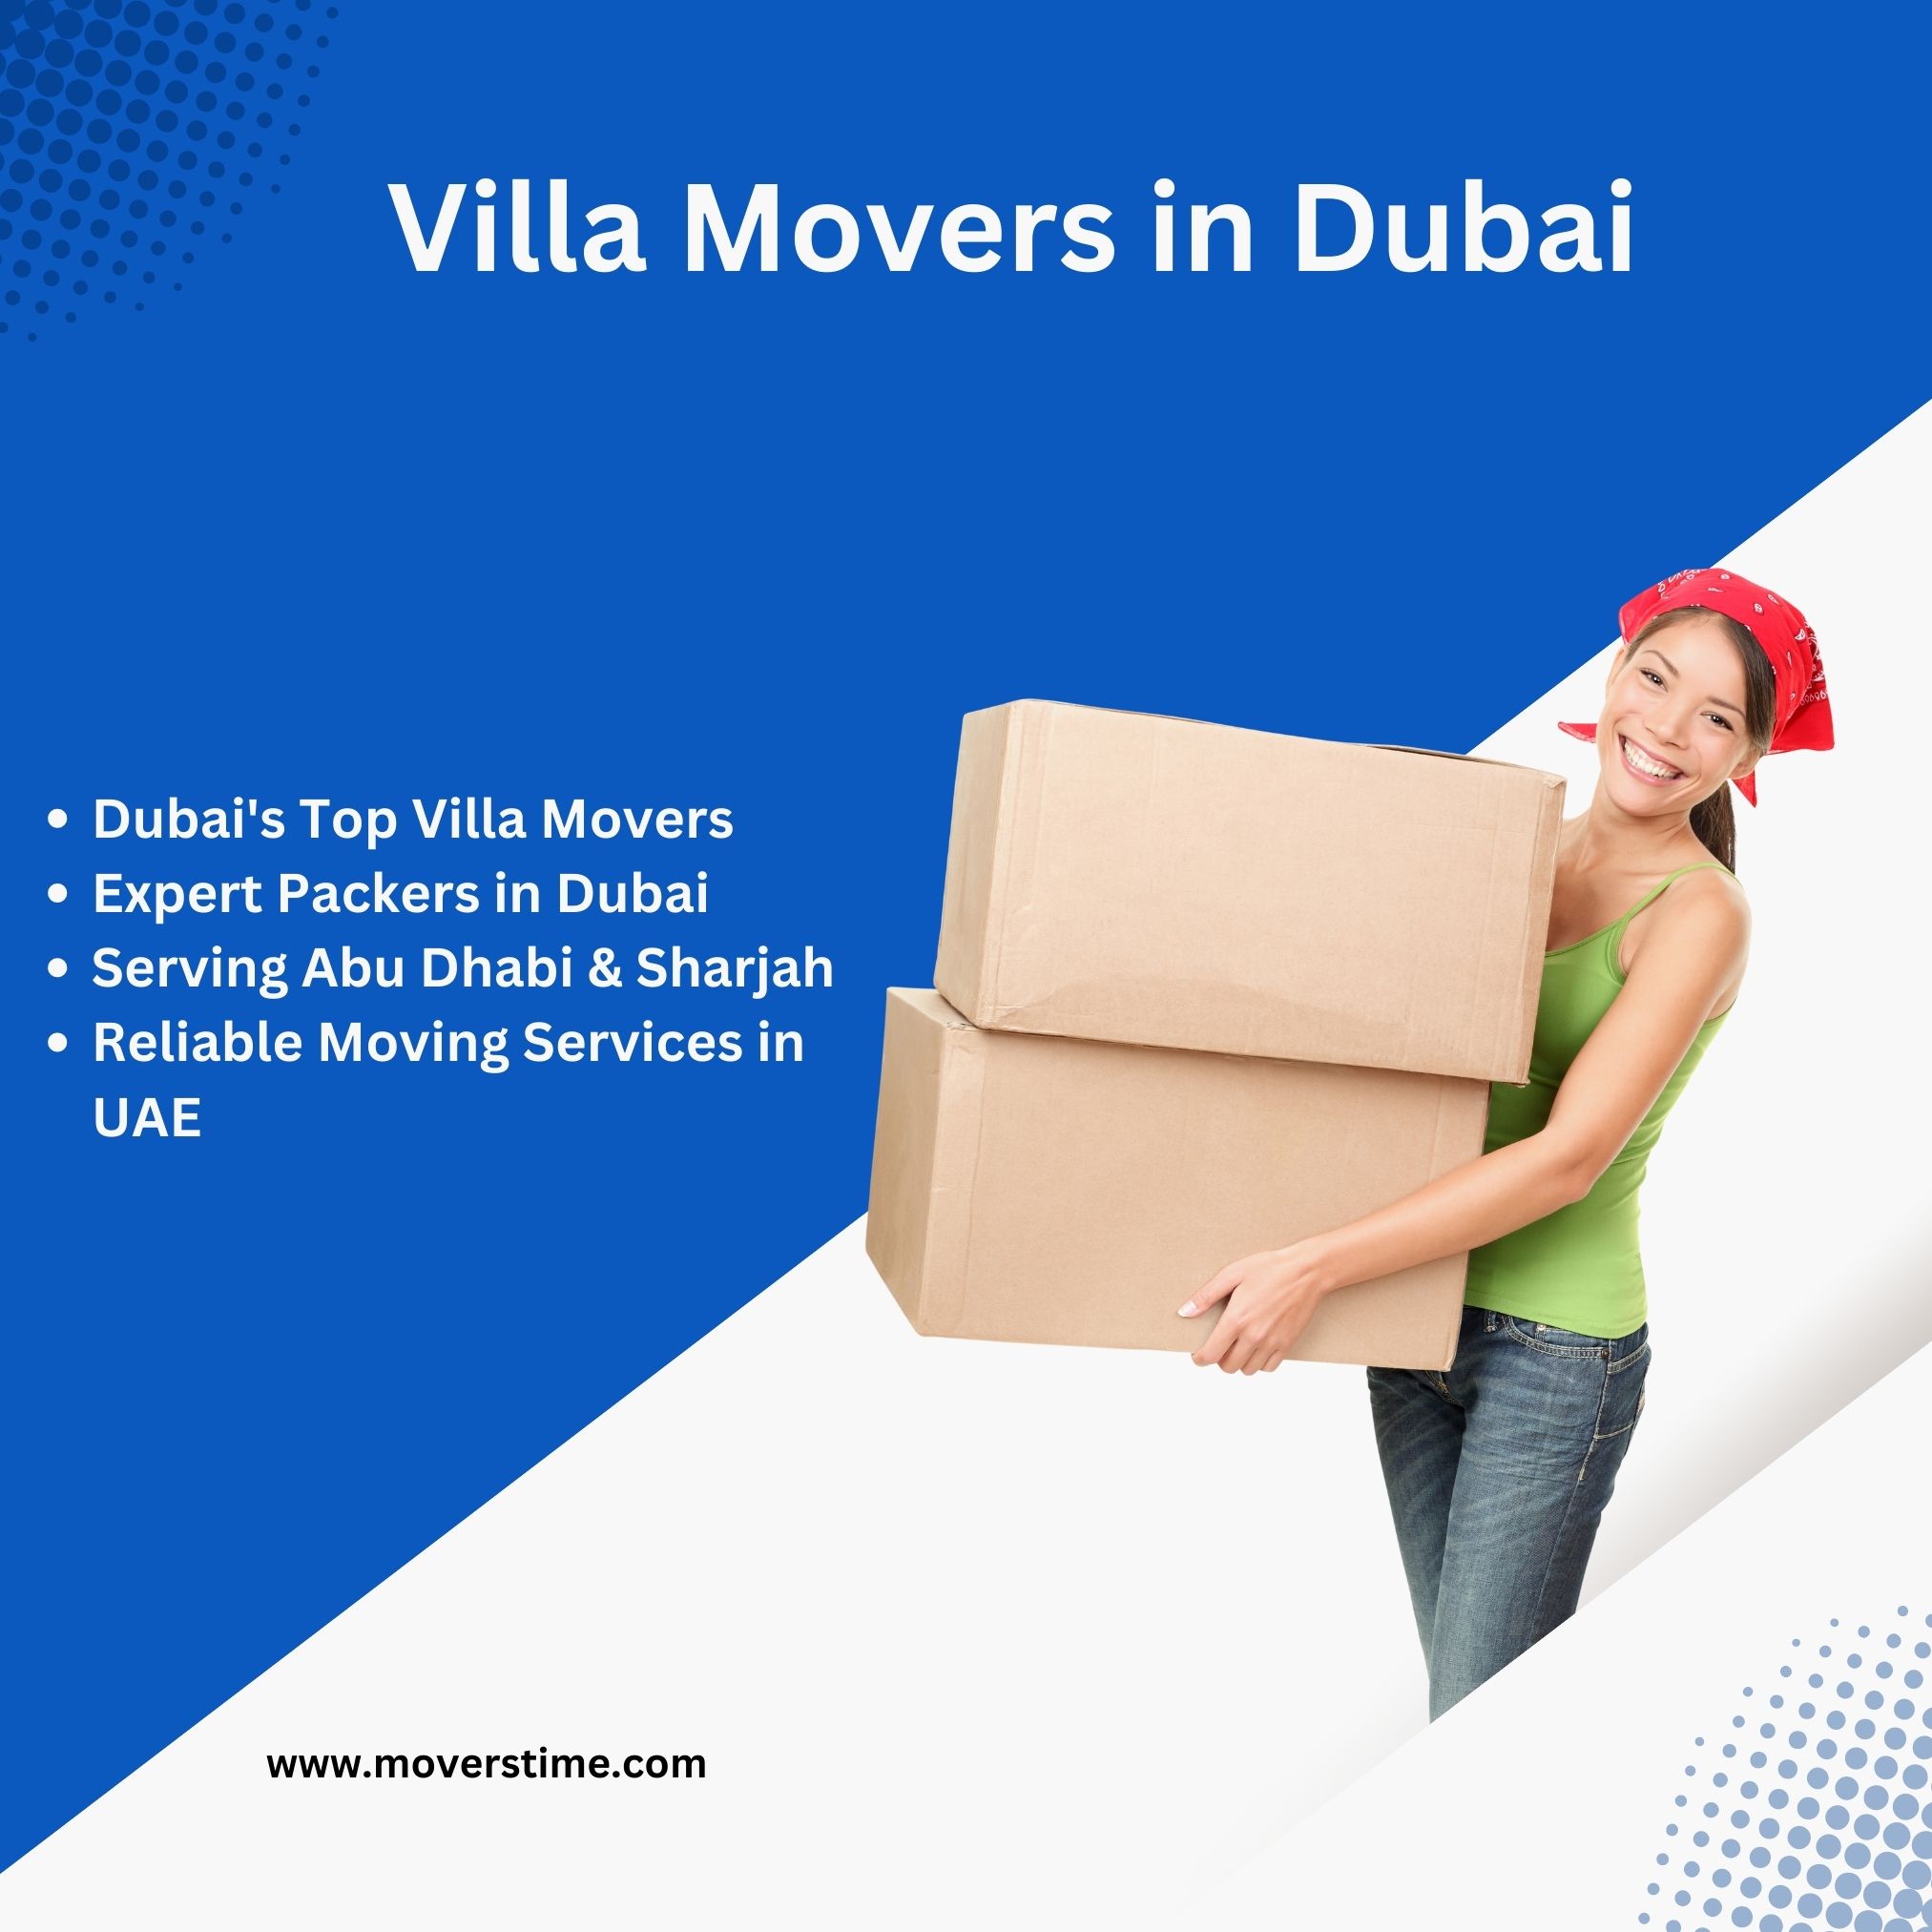 Movers-and-Packers-in-dubai.jpg